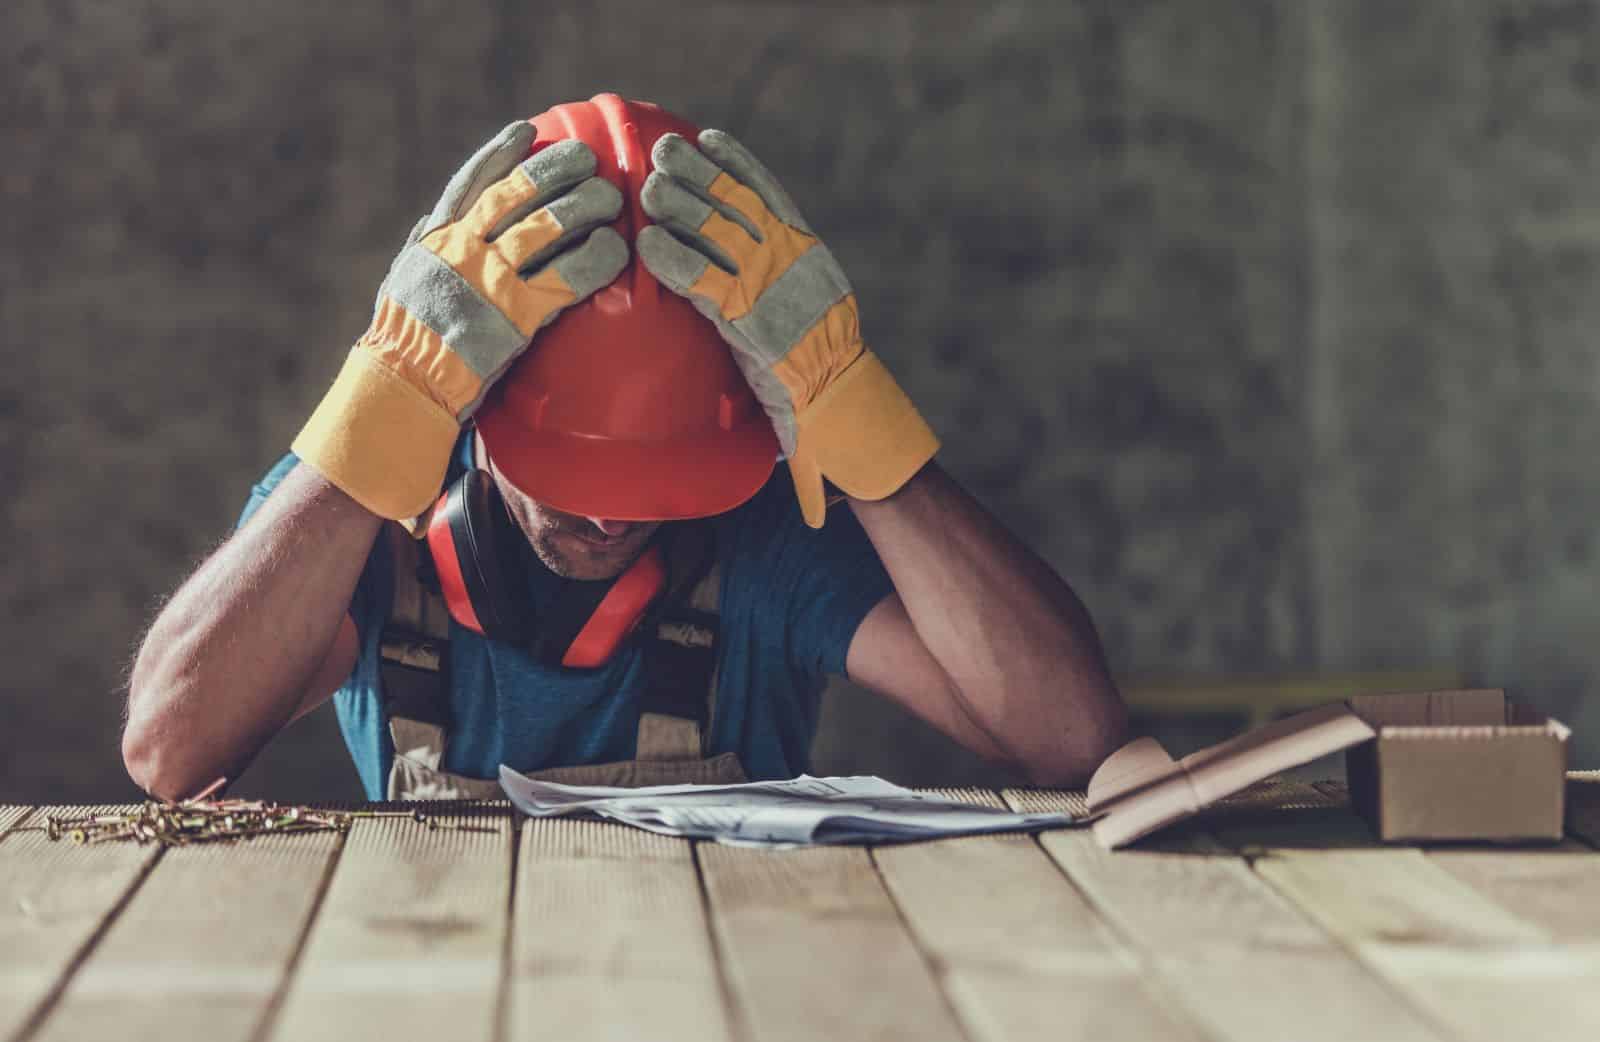 <p class="wp-caption-text">Image Credit: Shutterstock / Virrage Images</p>  <p><span>Voluntourism can inadvertently take jobs away from local workers. When volunteers offer free labor, locals may find themselves without work. For instance, a group of volunteers might build a school in a village, denying local construction workers paid employment opportunities.</span></p>